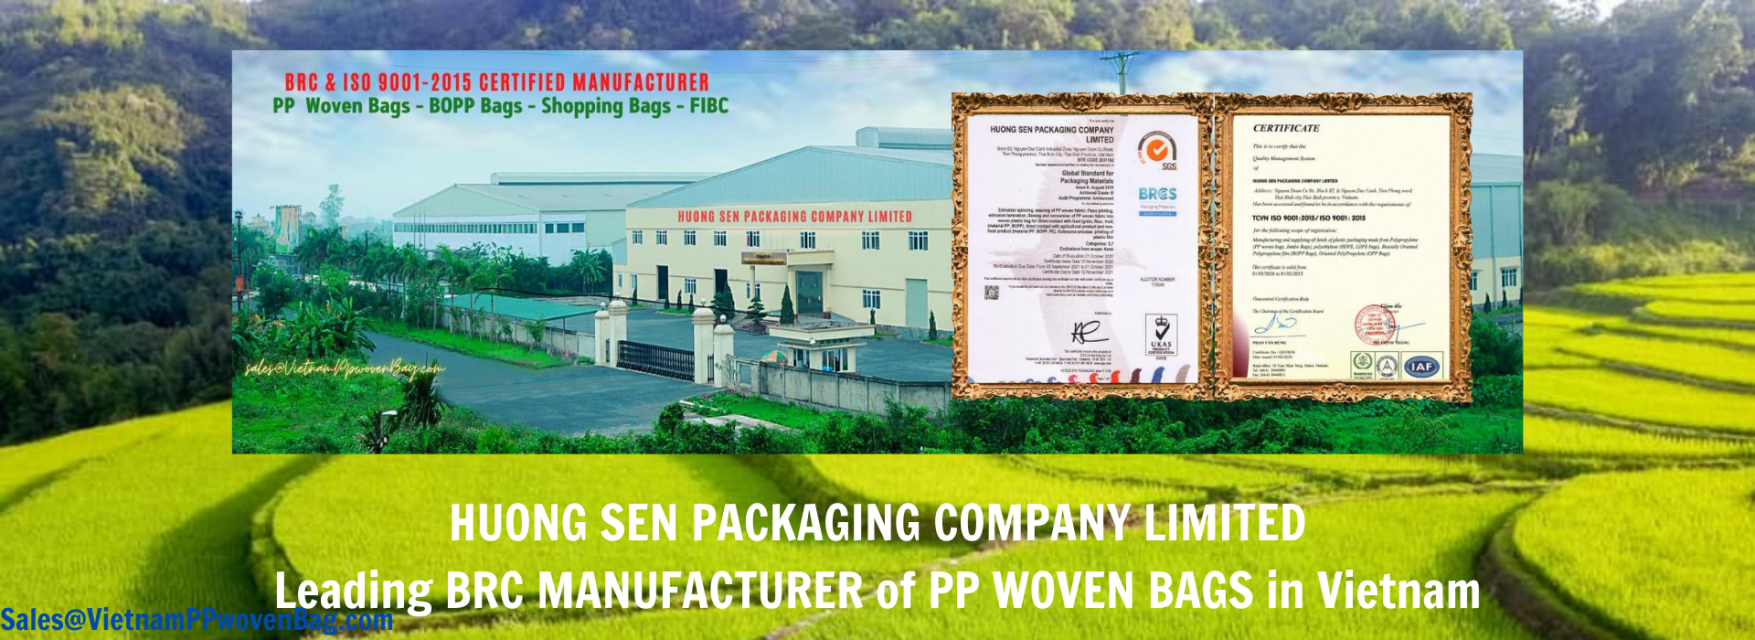 HUONG SEN PACKAGING COMPANY LIMITED